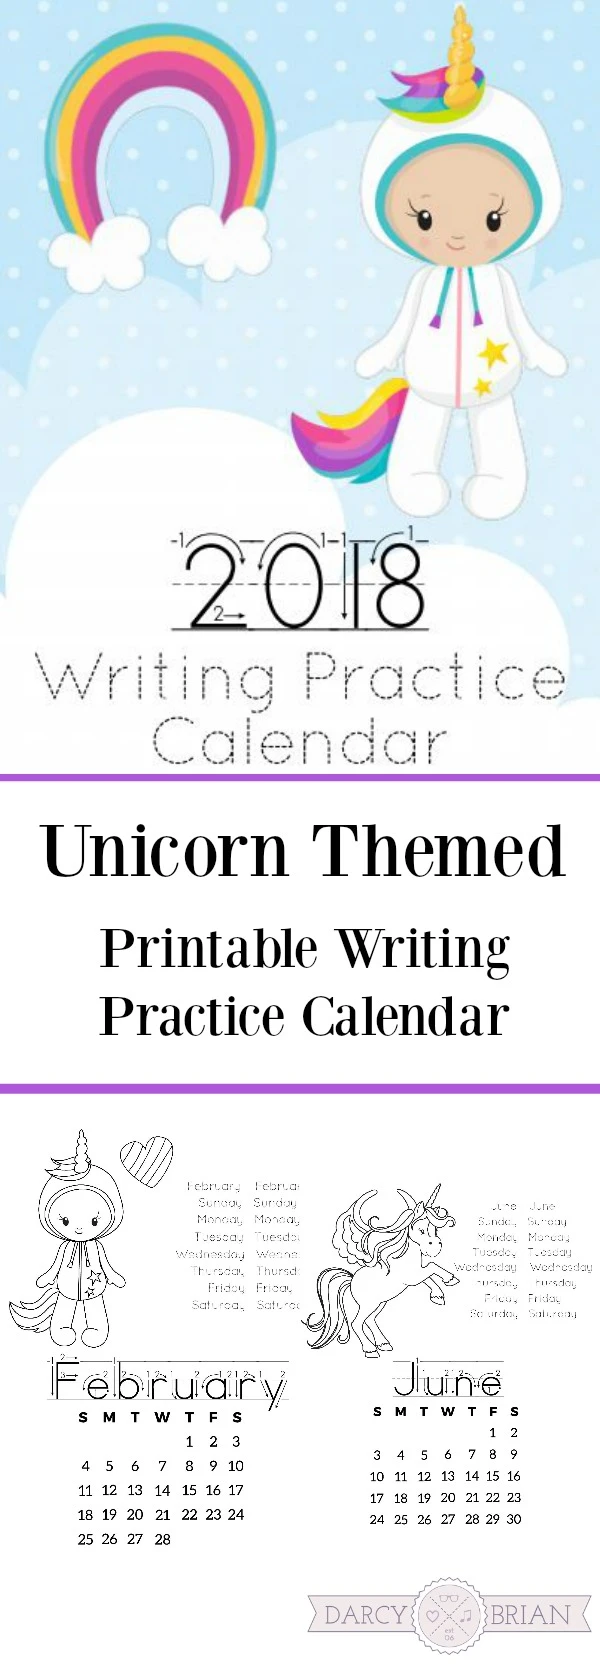 Does your child need extra writing practice? Do they love unicorns? Then they'll love this printable unicorn themed calendar! It's perfect for writing centers, teaching the calendar to kids, learning months of the year, learning days of the week, and practicing how to write.